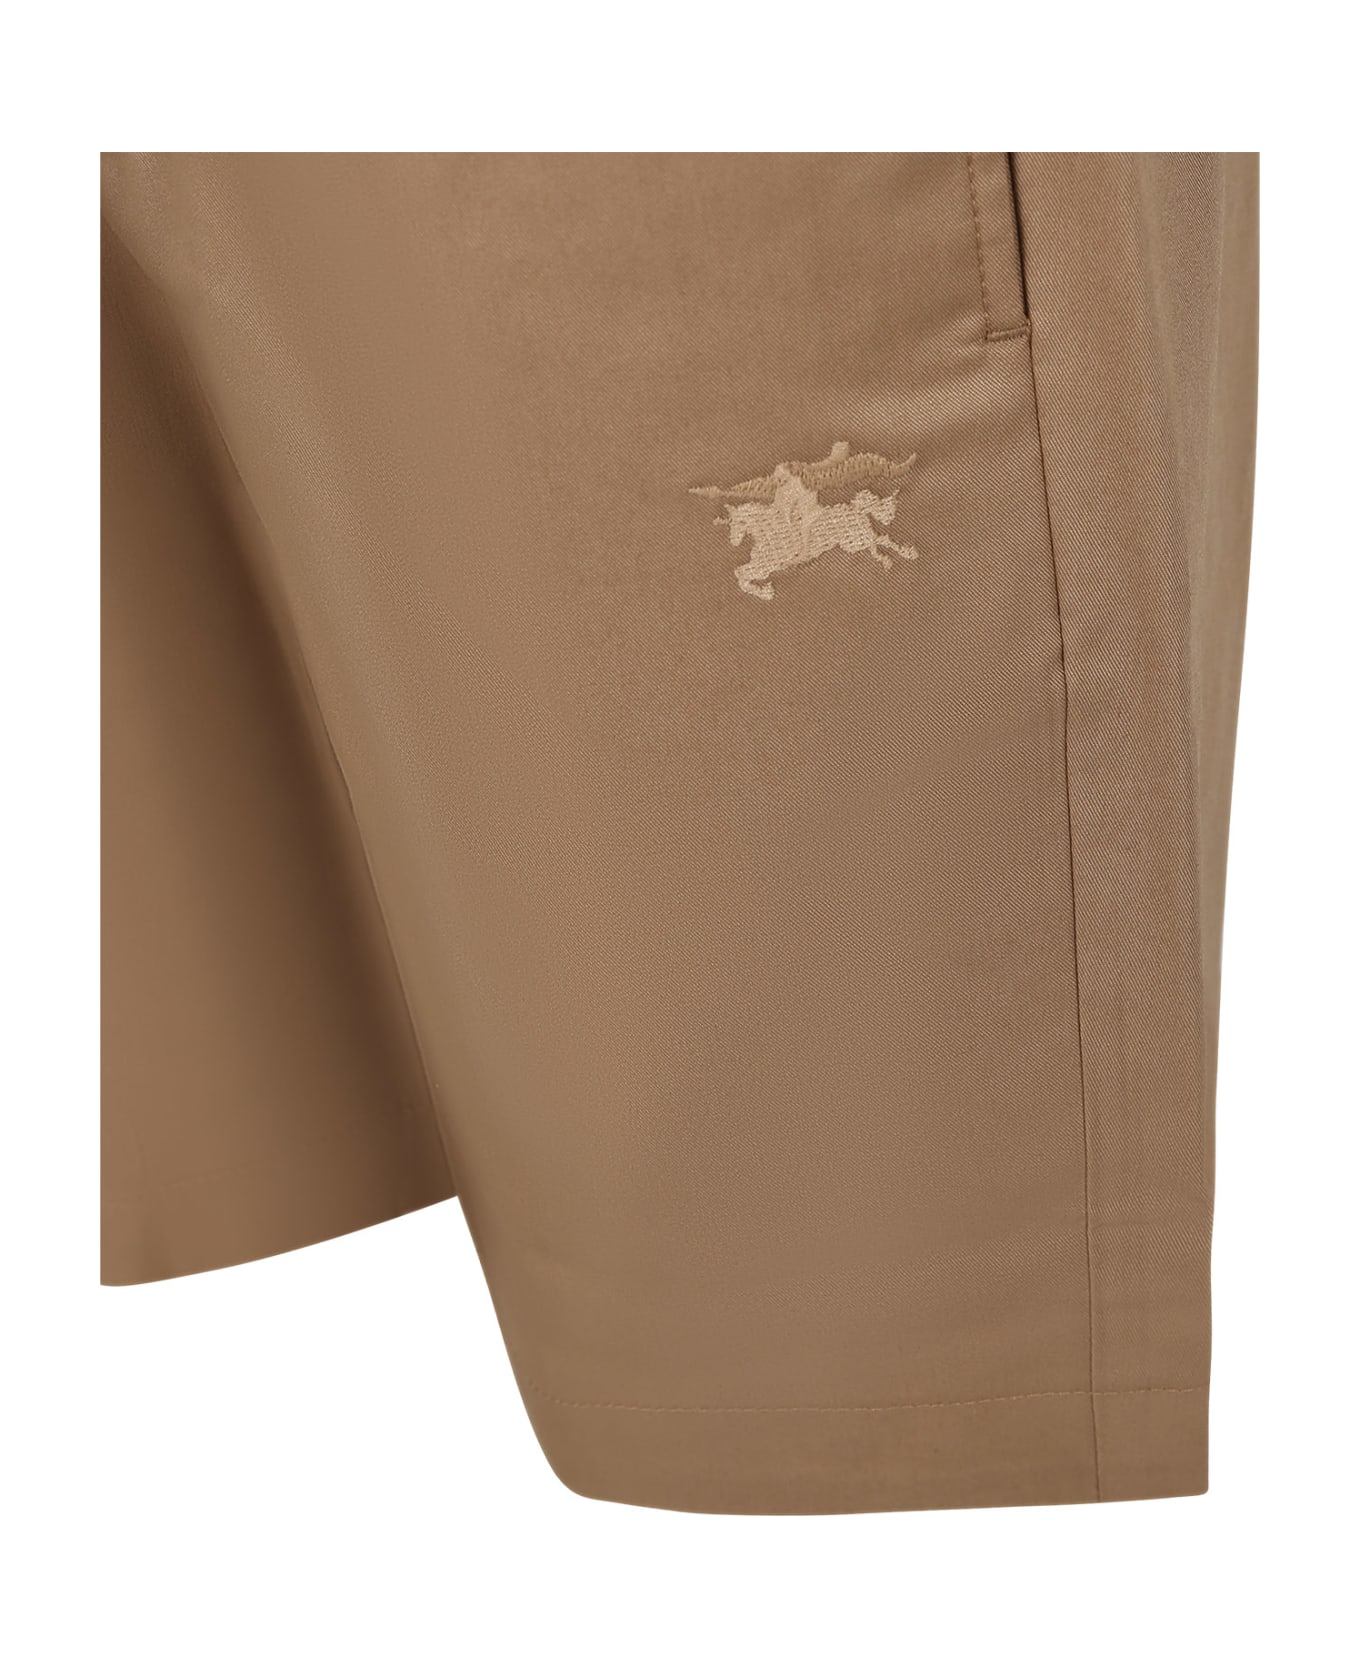 Burberry Beige Shorts For Boy With Logo - Beige ボトムス